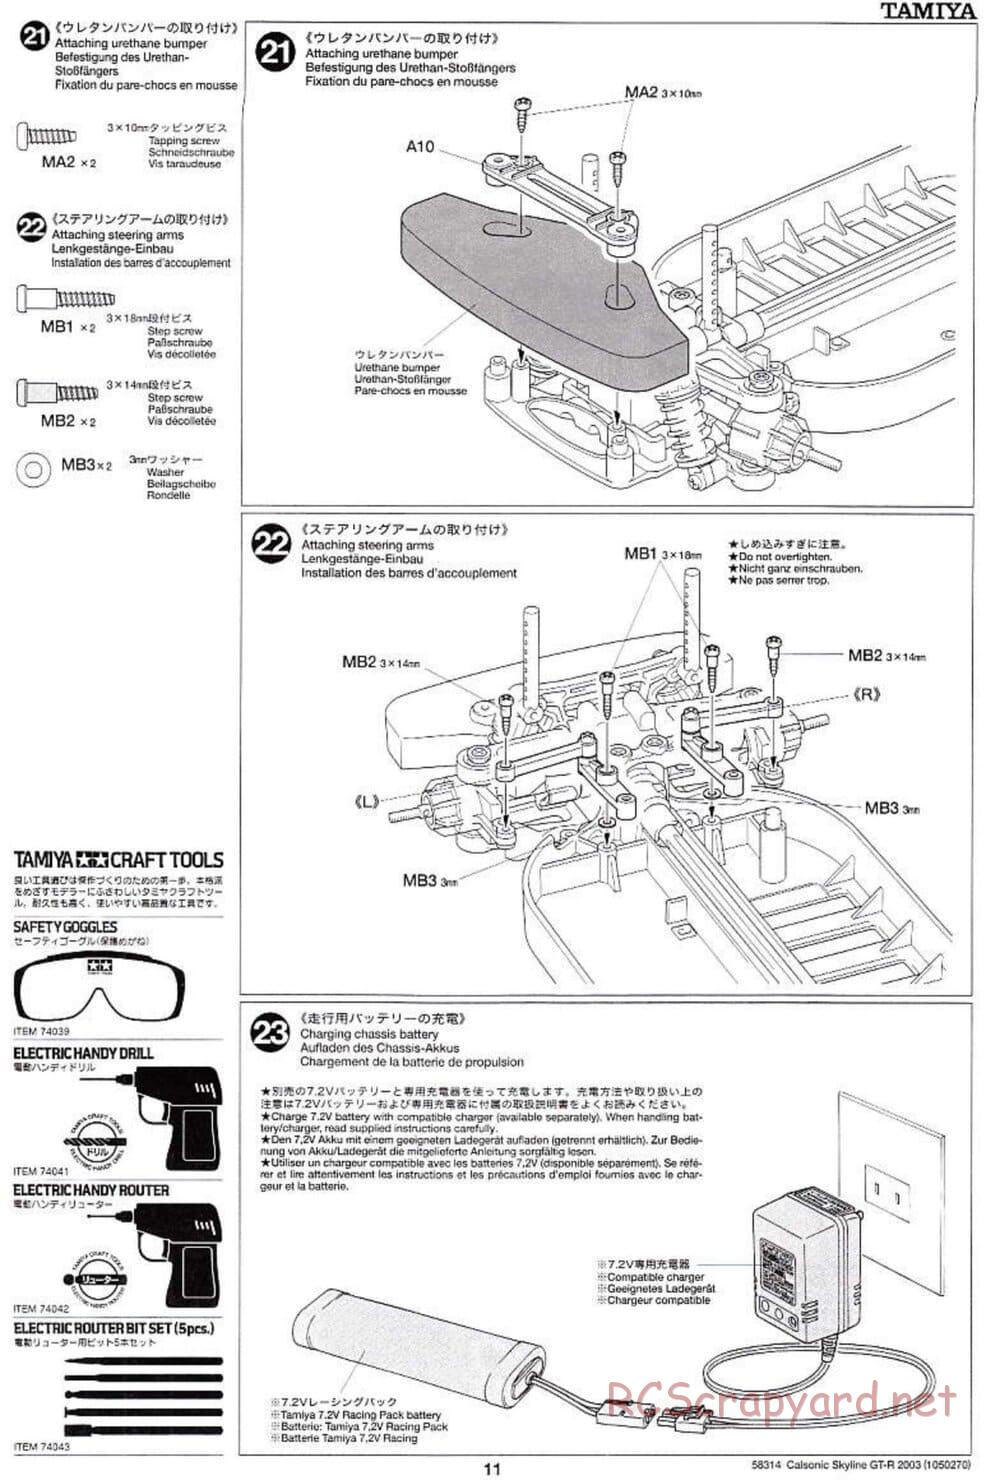 Tamiya - Calsonic Skyline GT-R 2003 - TT-01 Chassis - Manual - Page 11